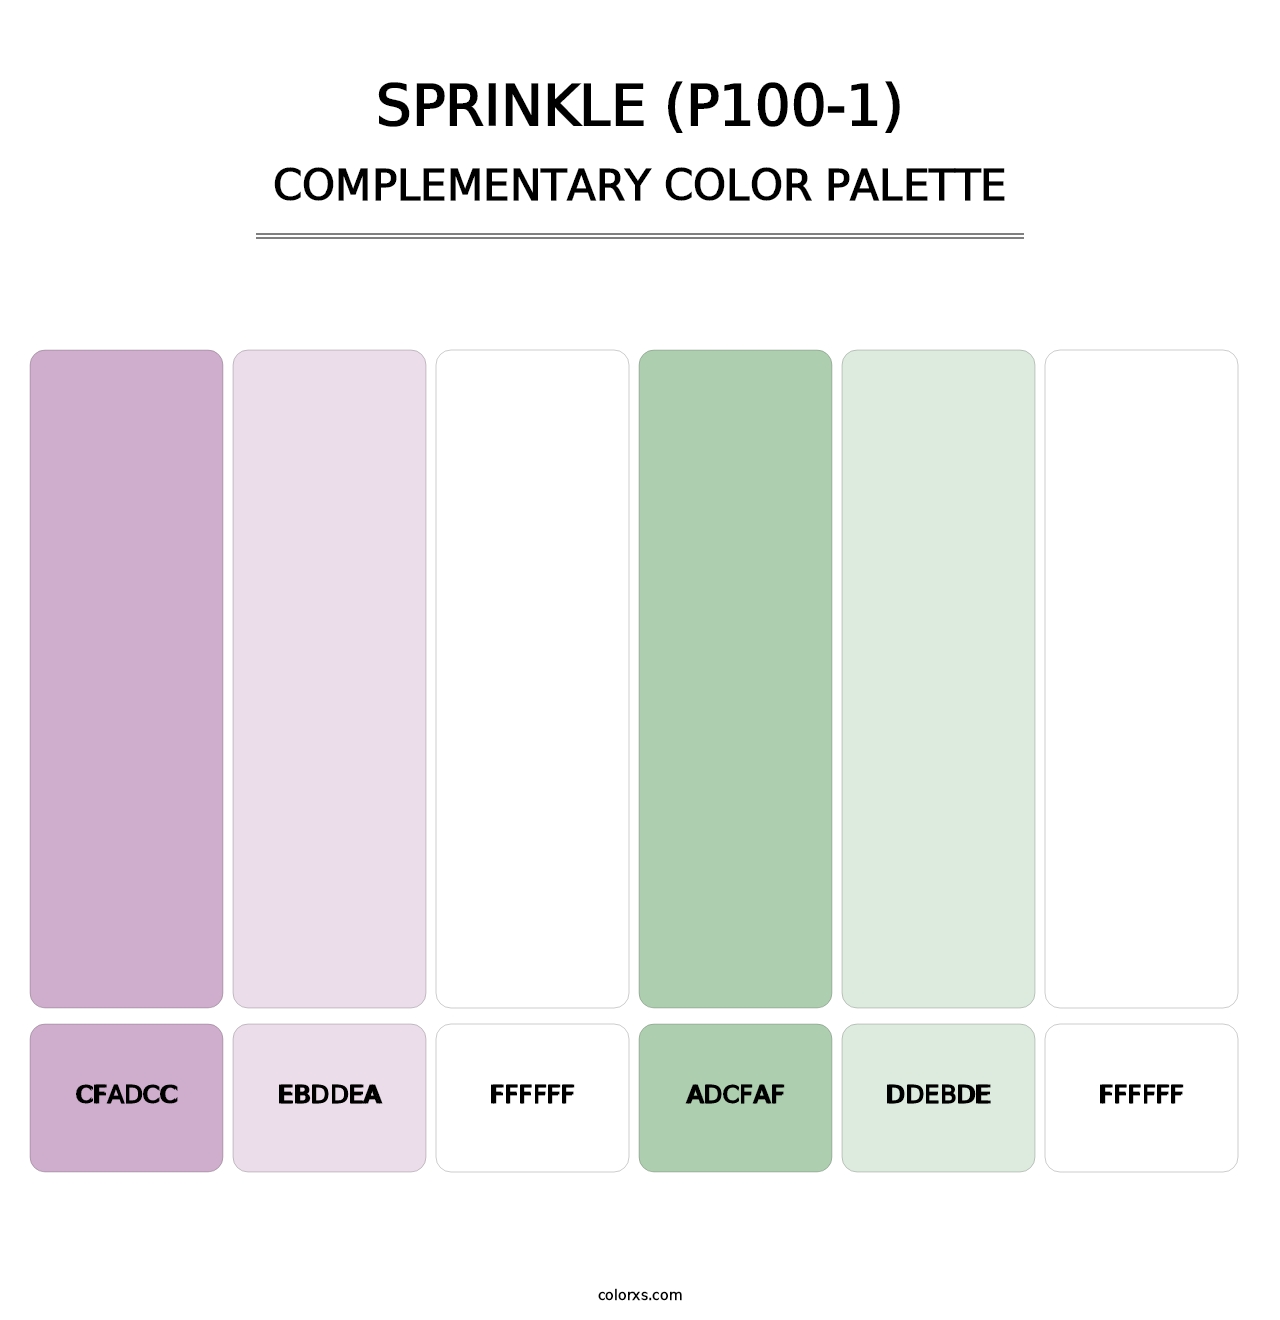 Sprinkle (P100-1) - Complementary Color Palette